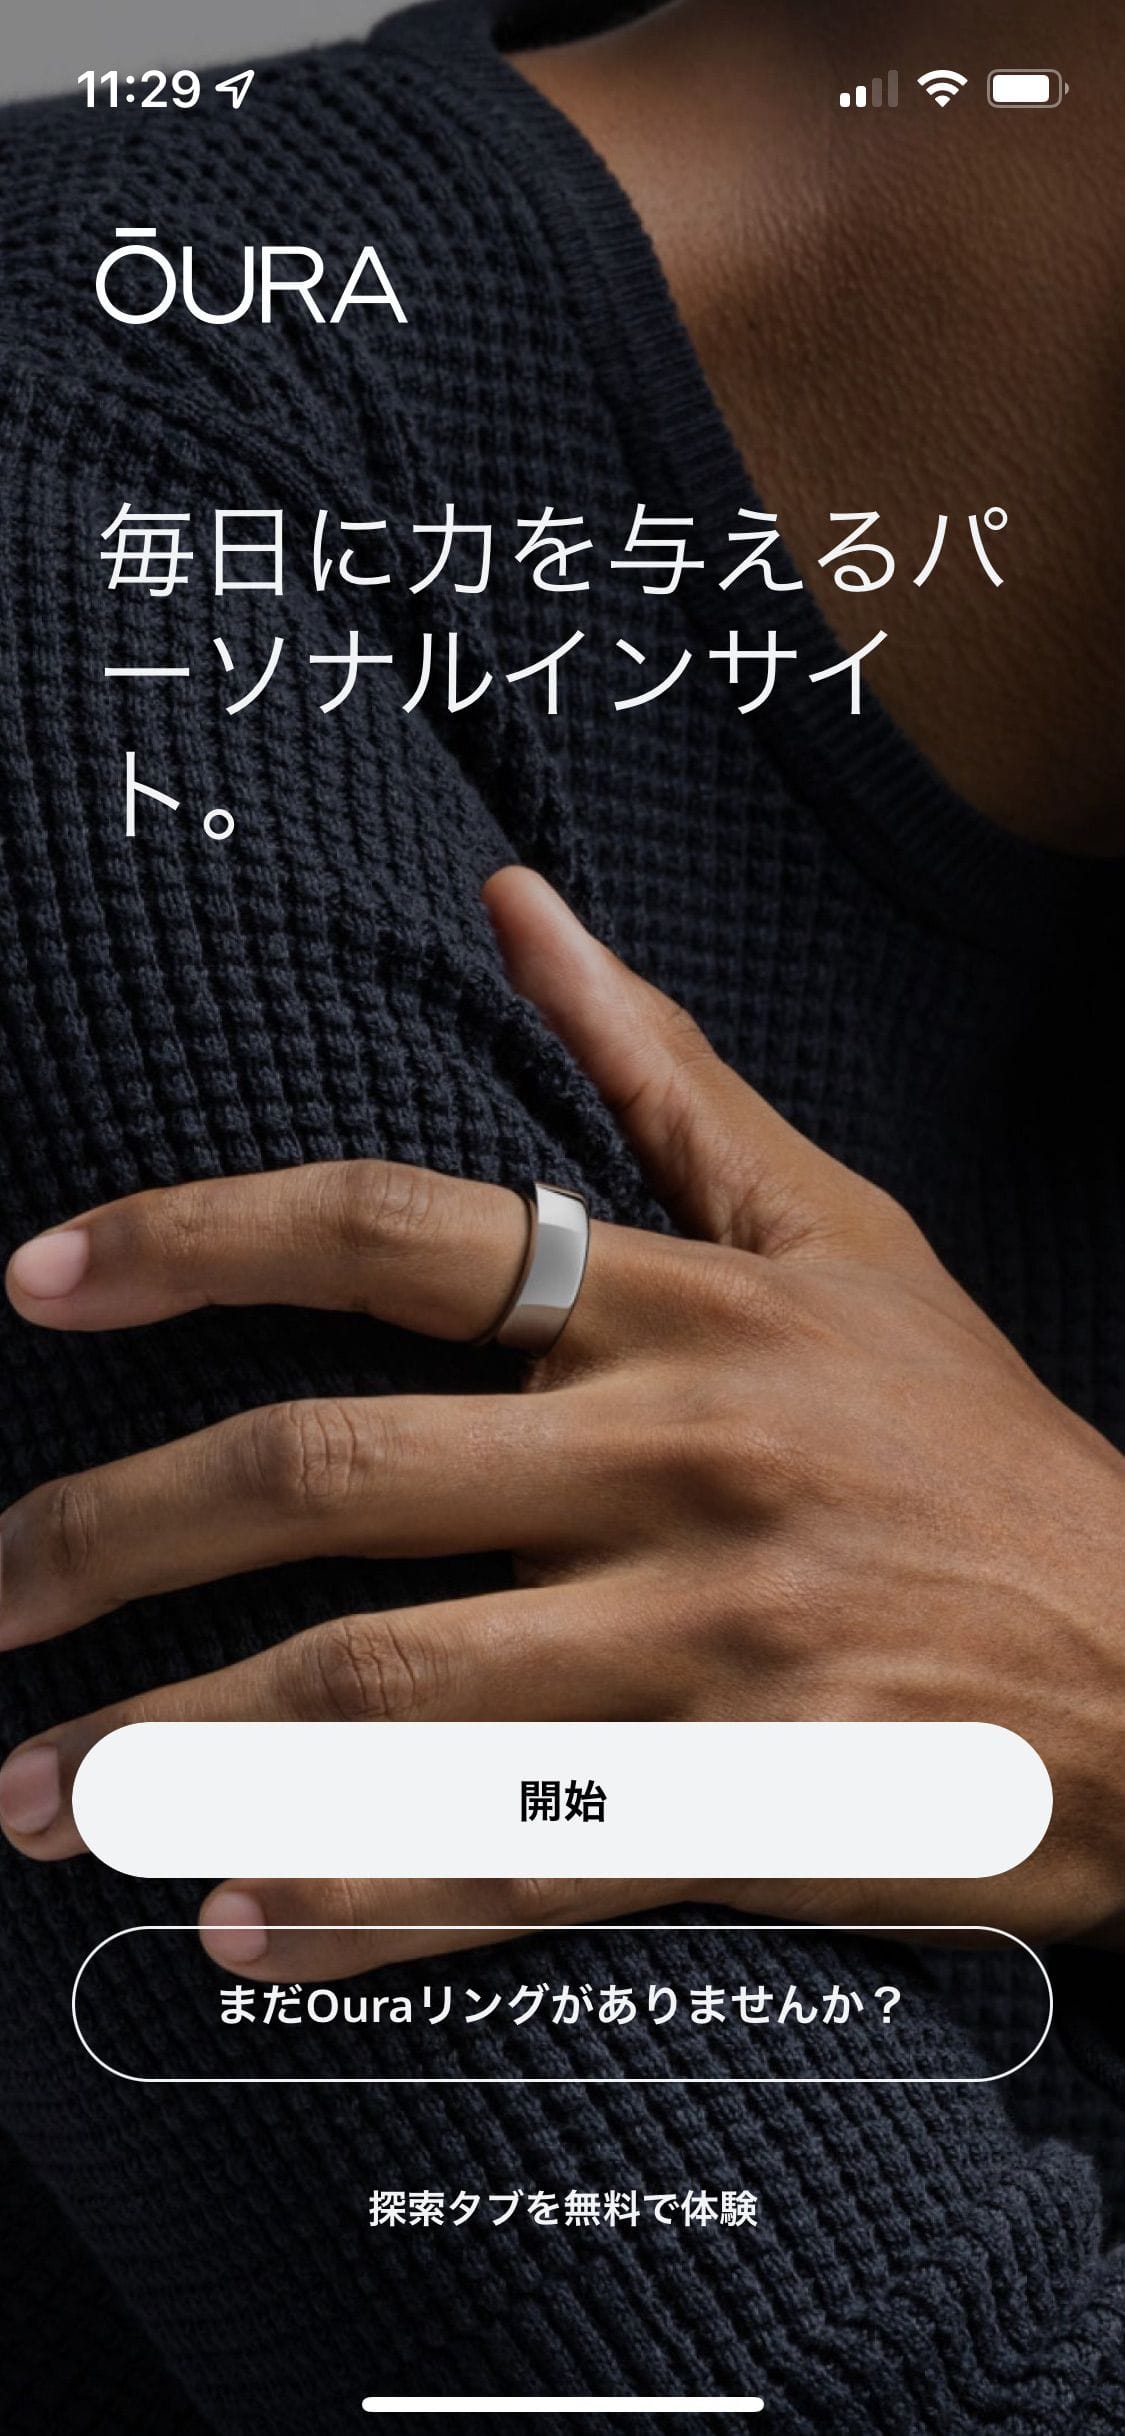 Oura Ring 3の初期設定方法